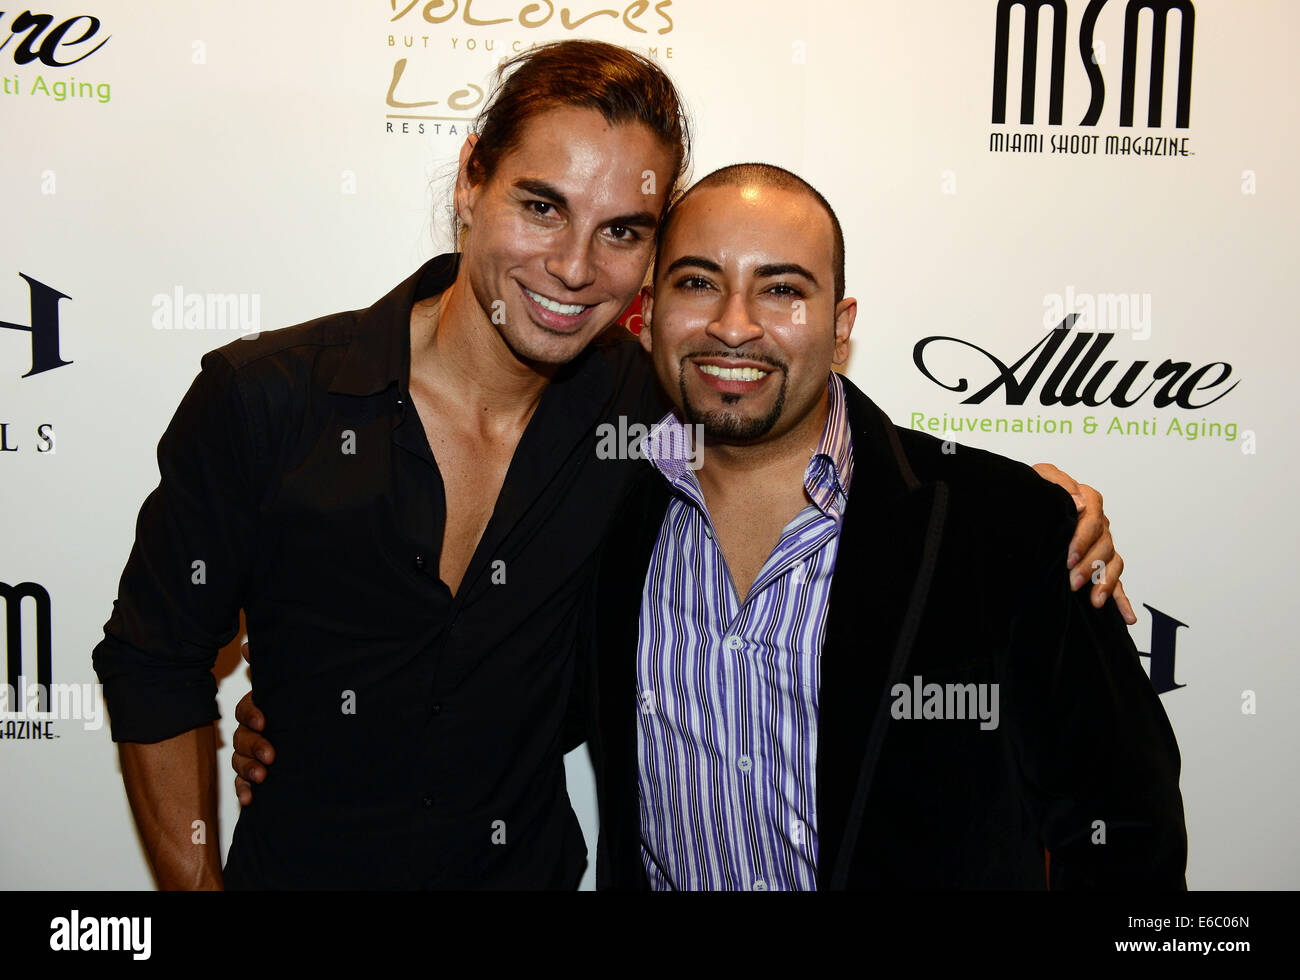 MSM (Miami Shoot Magazine) debut cover release party held at DOLORES but you can call me LOLITA restaurant and lounge - Arrivals  Featuring: Julio Iglesias Jr Where: Miami, Florida, United States When: 01 Feb 2014 Stock Photo